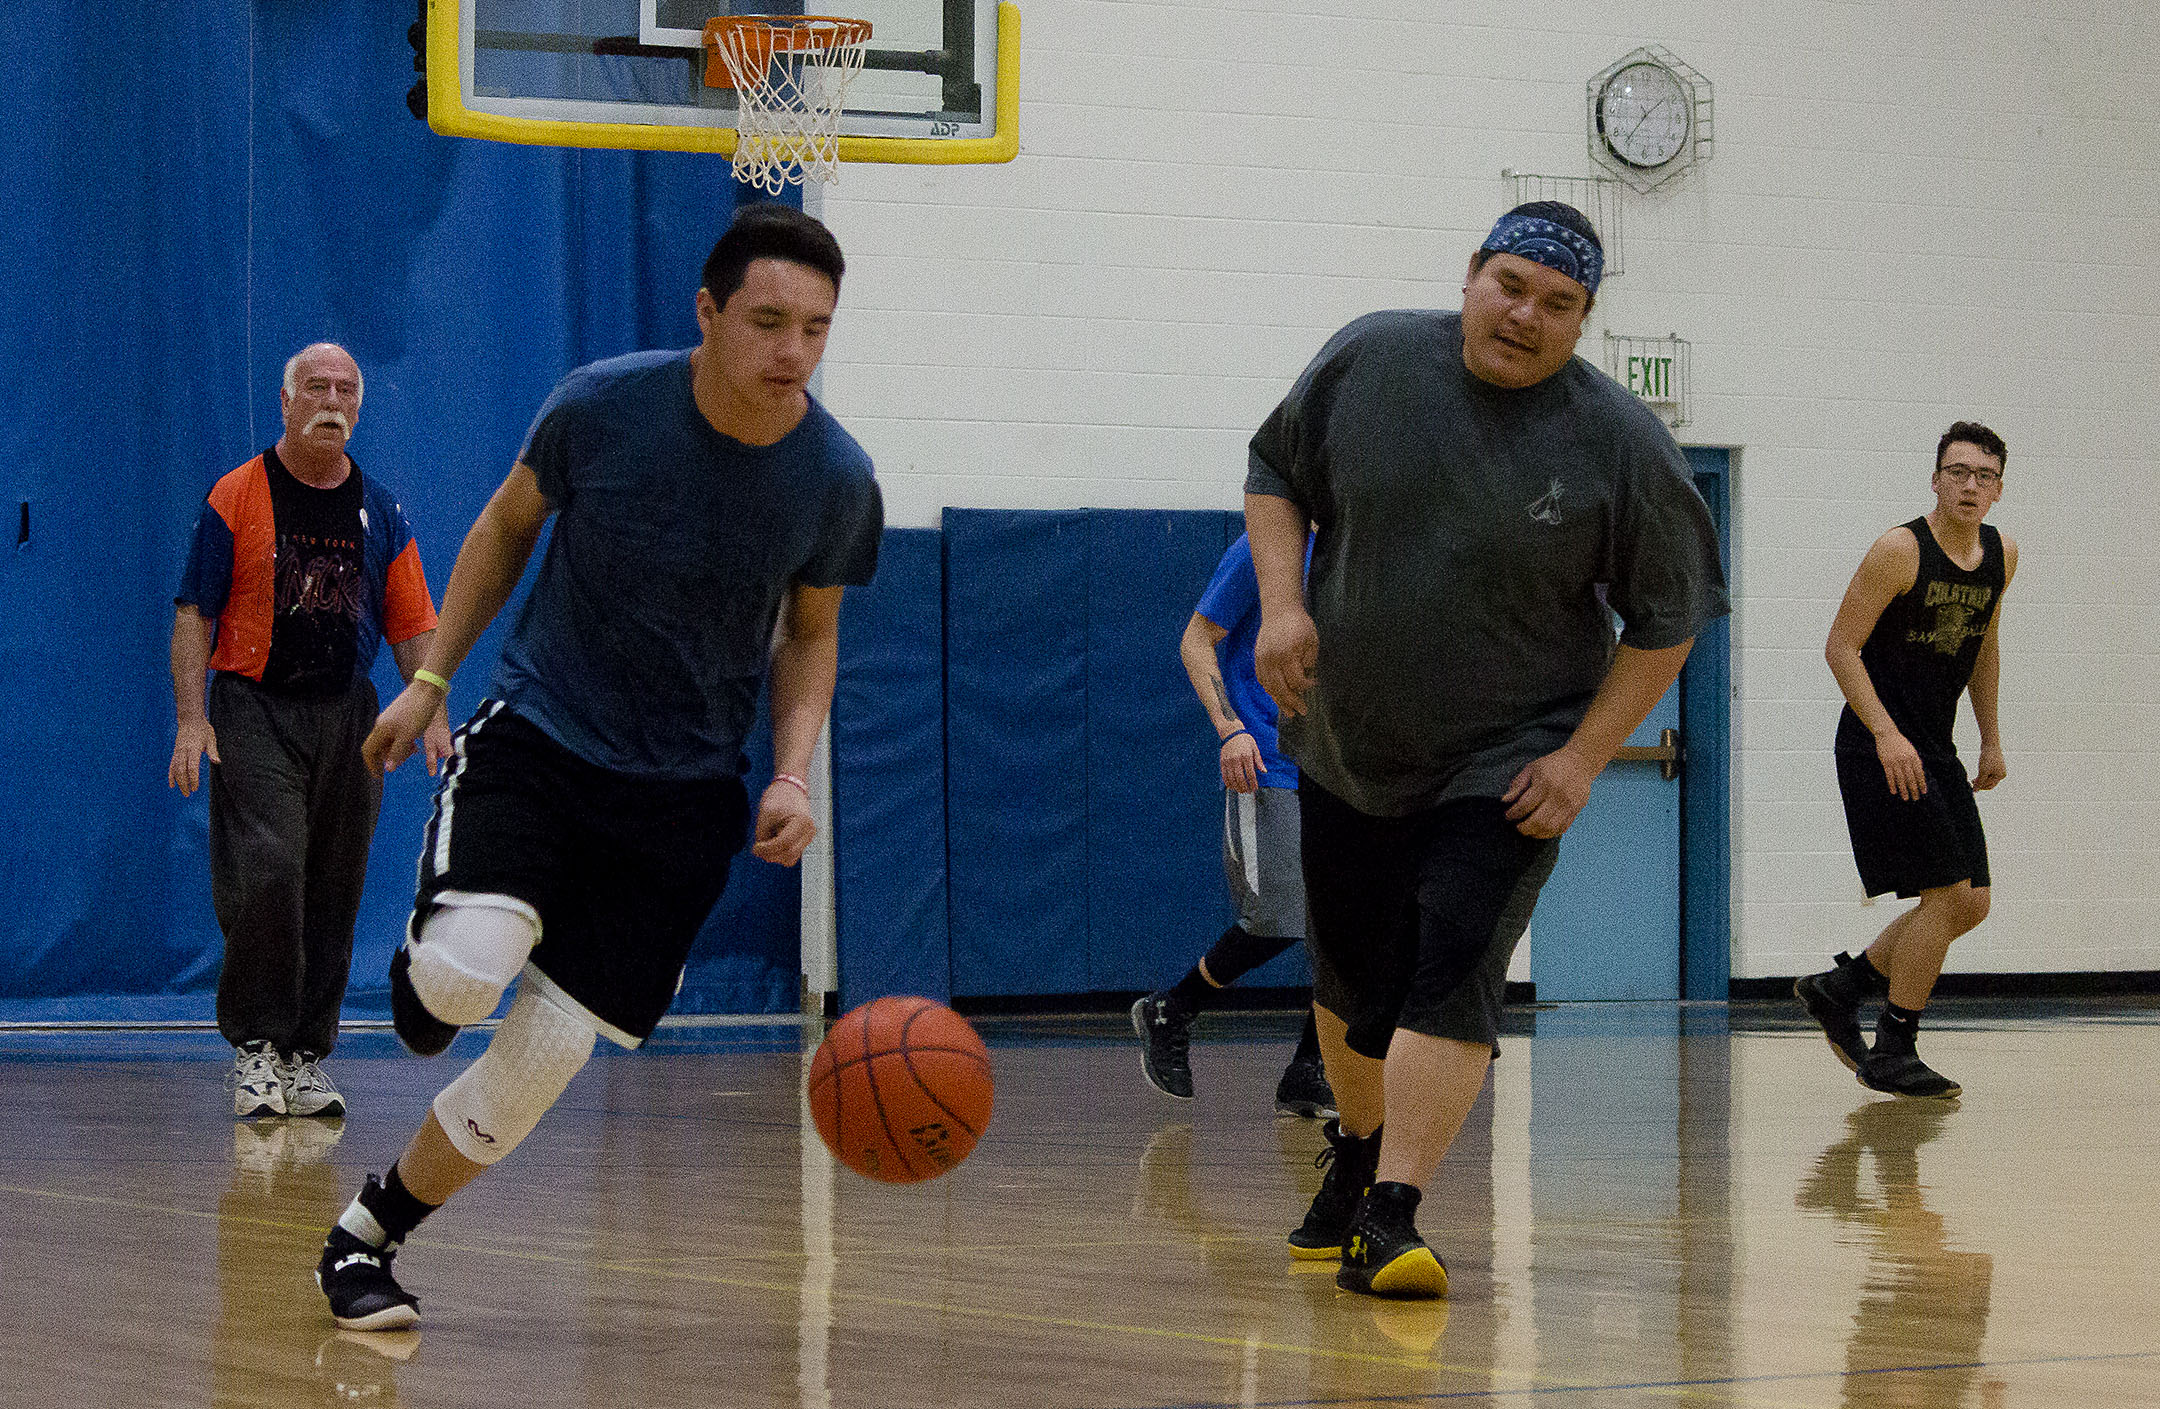 Killsback, right, says basketball is the favorite local pastime on the reservation. He wants to invest tribal resources into diabetes prevention through cultural and lifestyle changes.